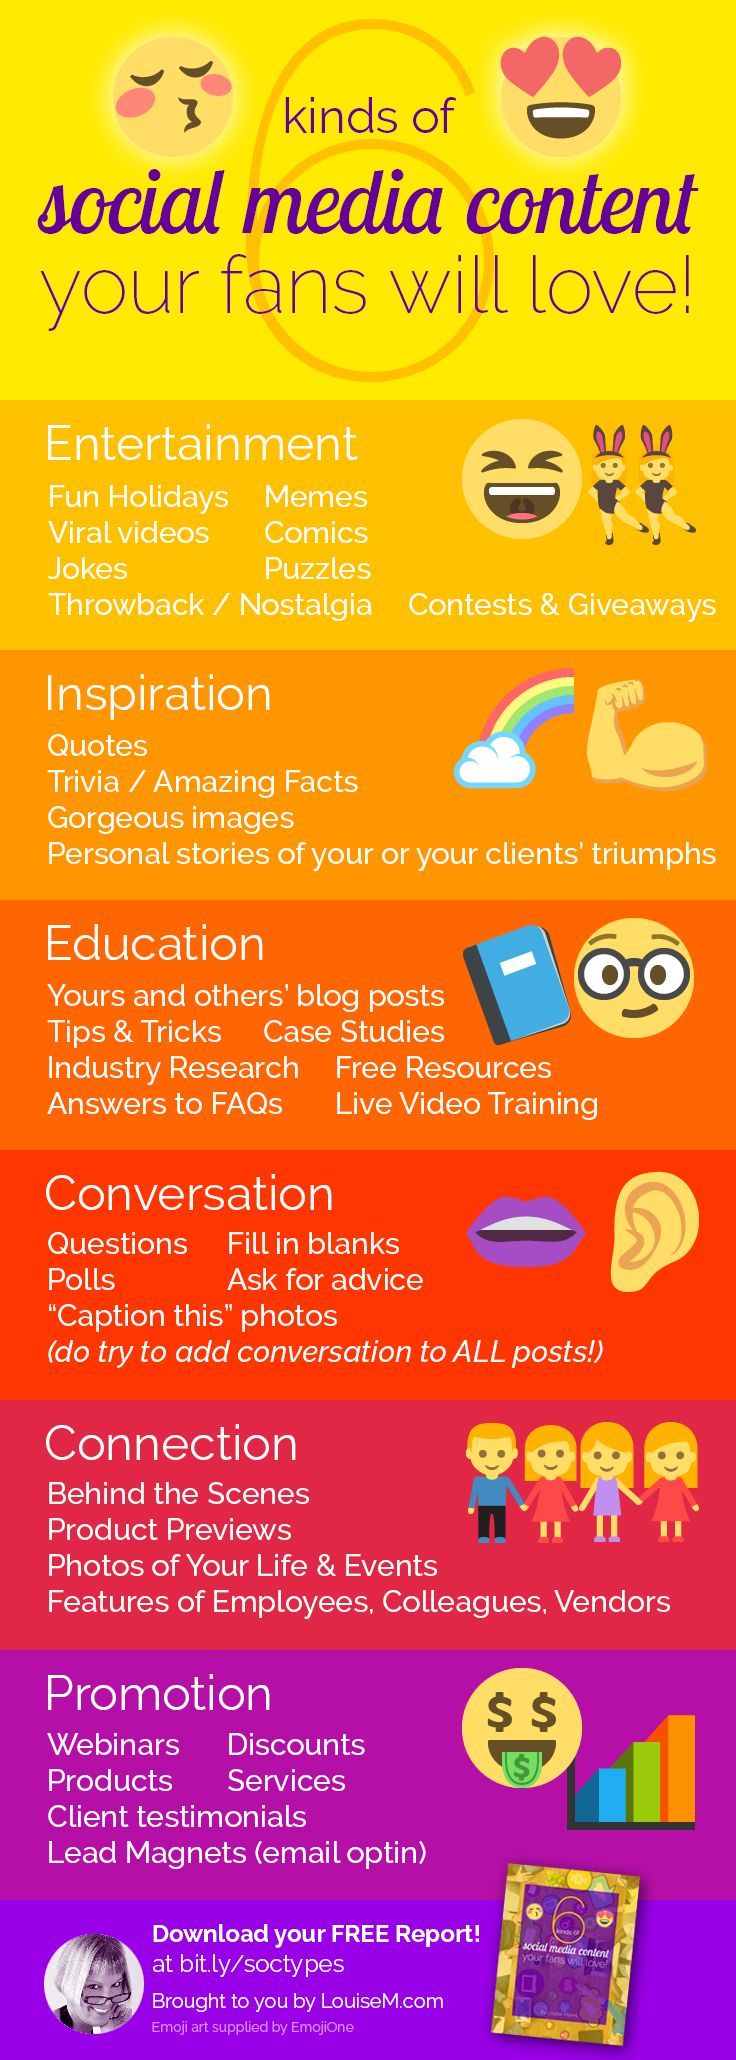 1530165299_957_Marketing-Infographic-Social-media-marketing-tips-Click-to-blog-for-FREE-download-with-content-catego Marketing Infographic : Social media marketing tips: vary your content categories to keep your followers...